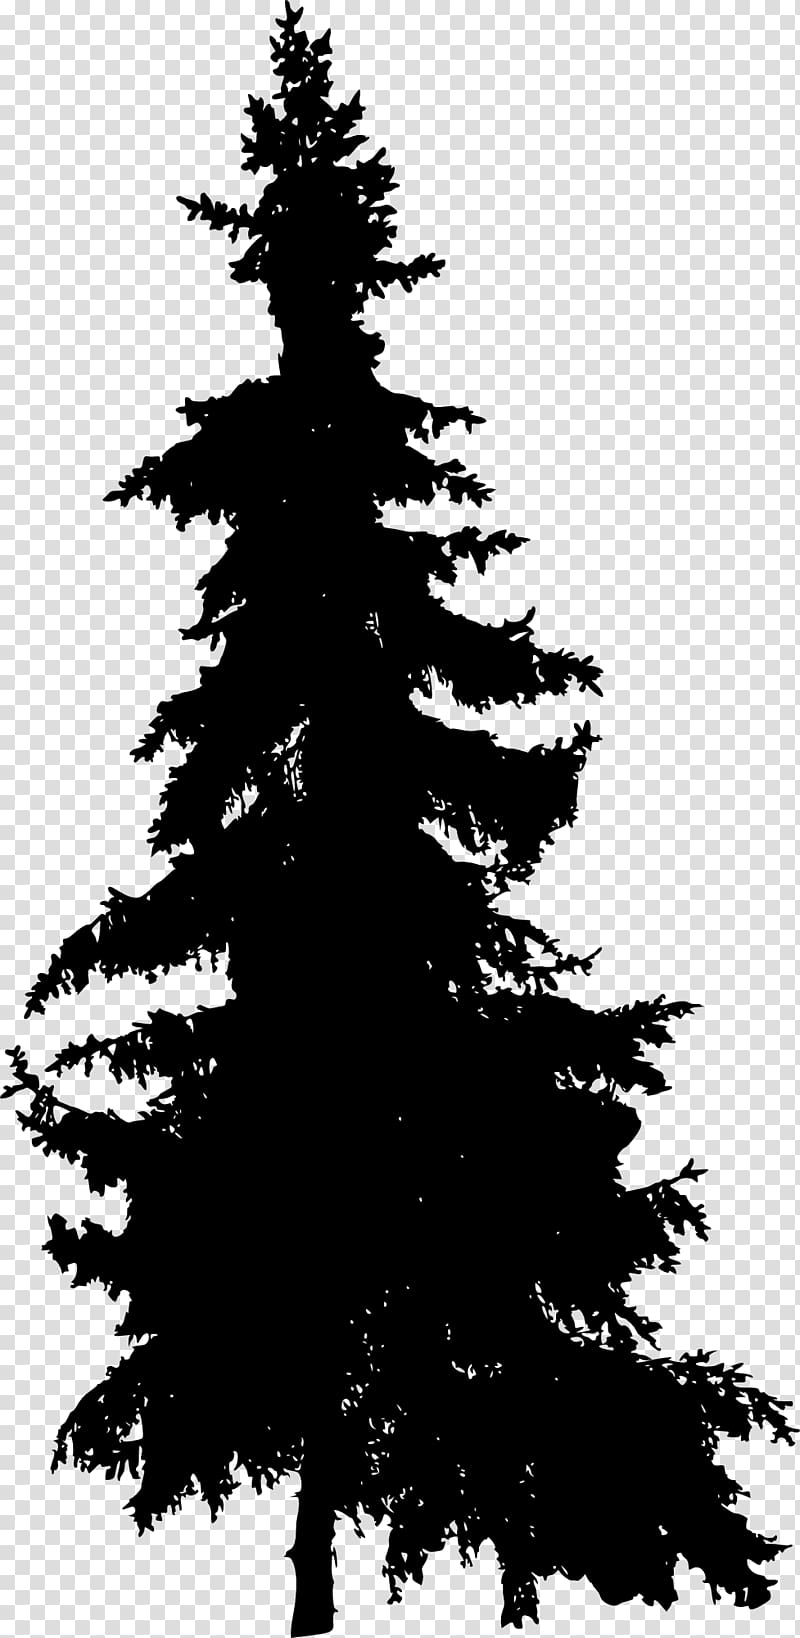 Pine Blue spruce Fir Tree, pine tree transparent background PNG clipart